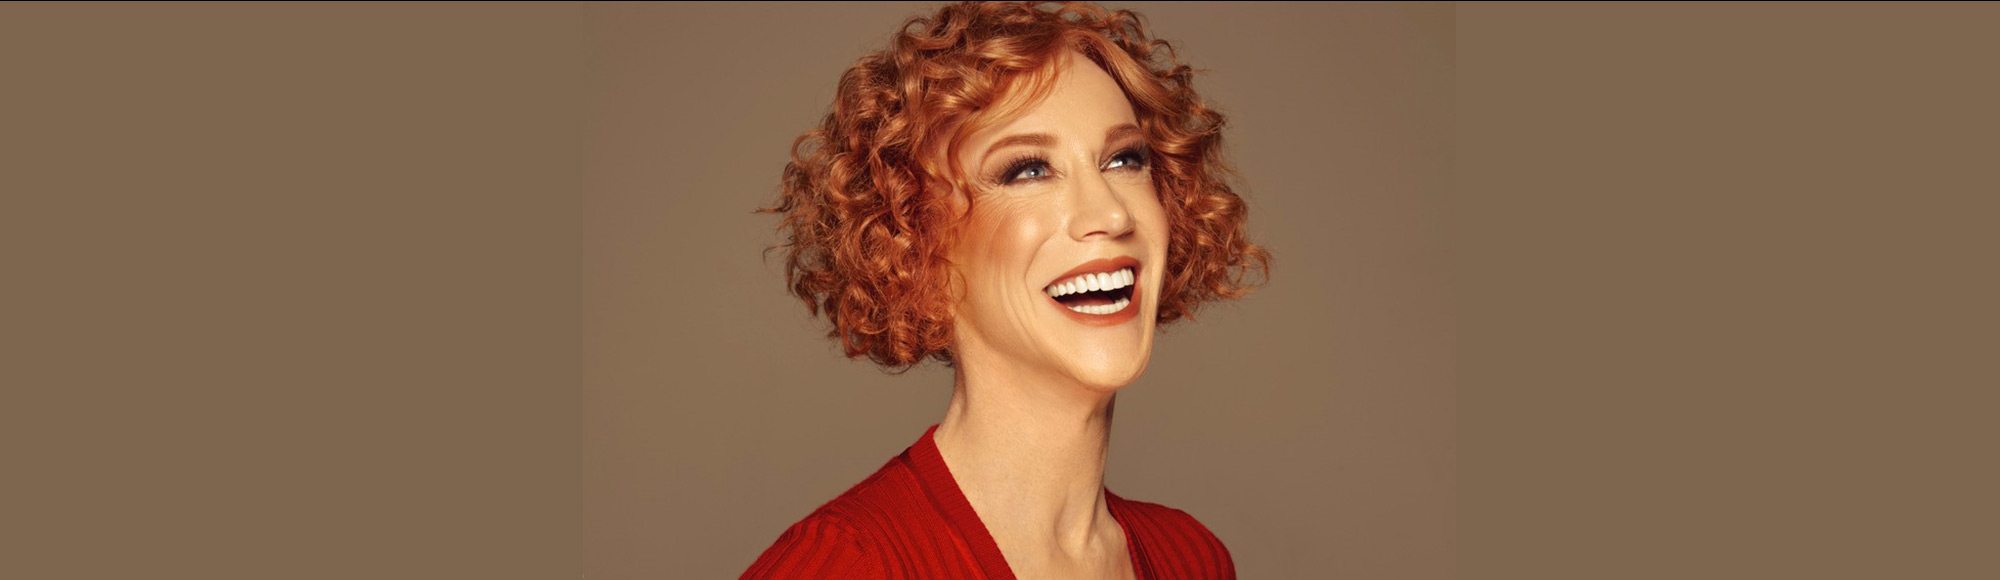 Kathy Griffin show